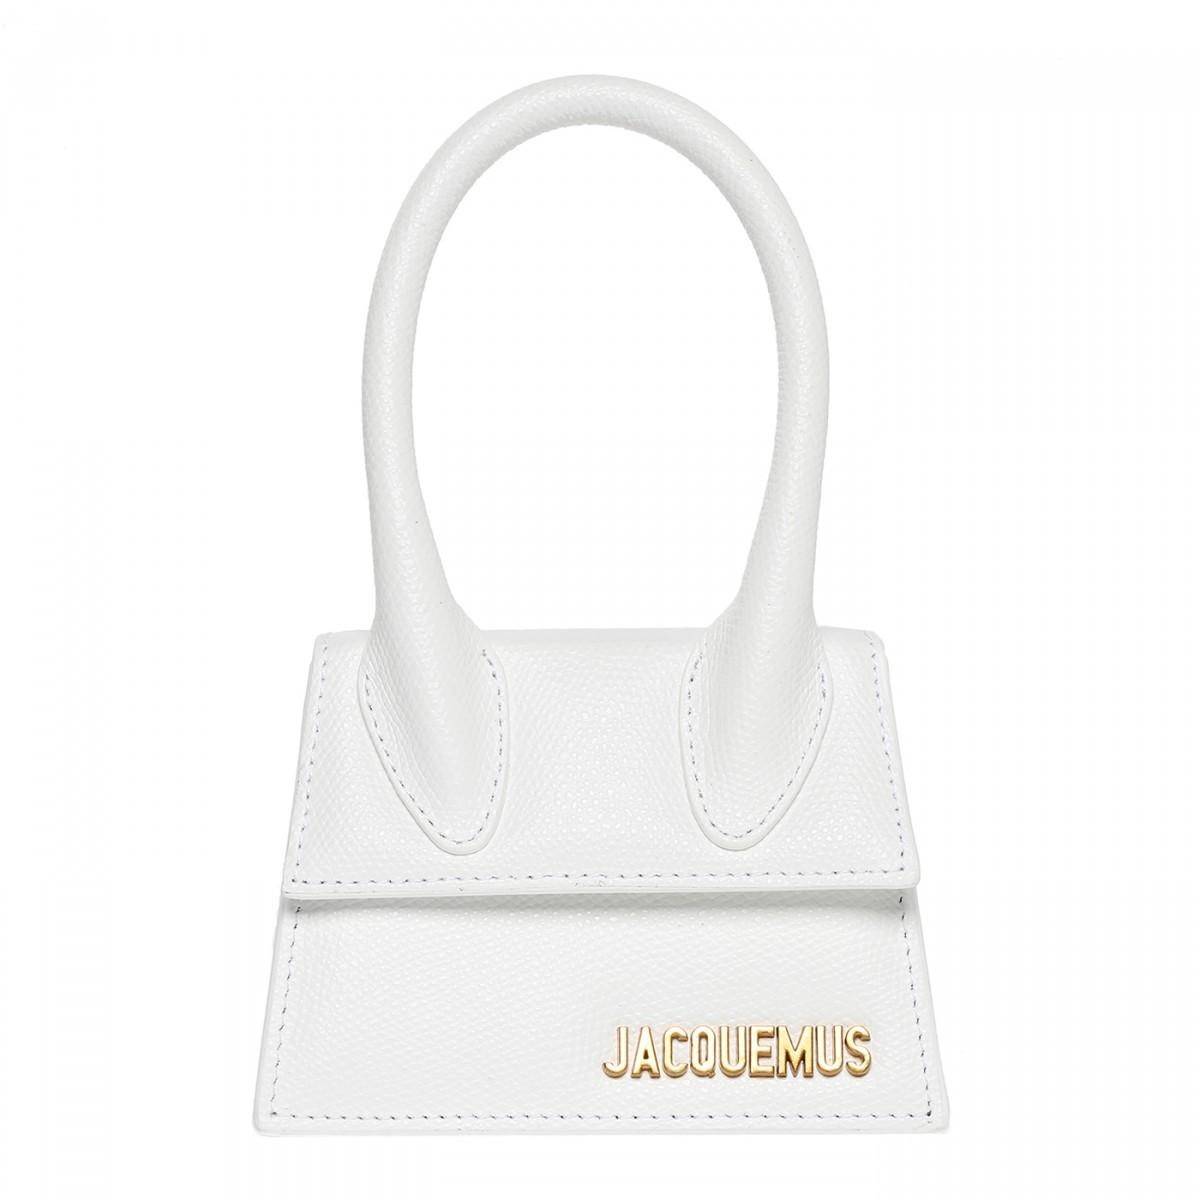 Jacquemus Leather Le Chiquito Mini Bag in White - Lyst